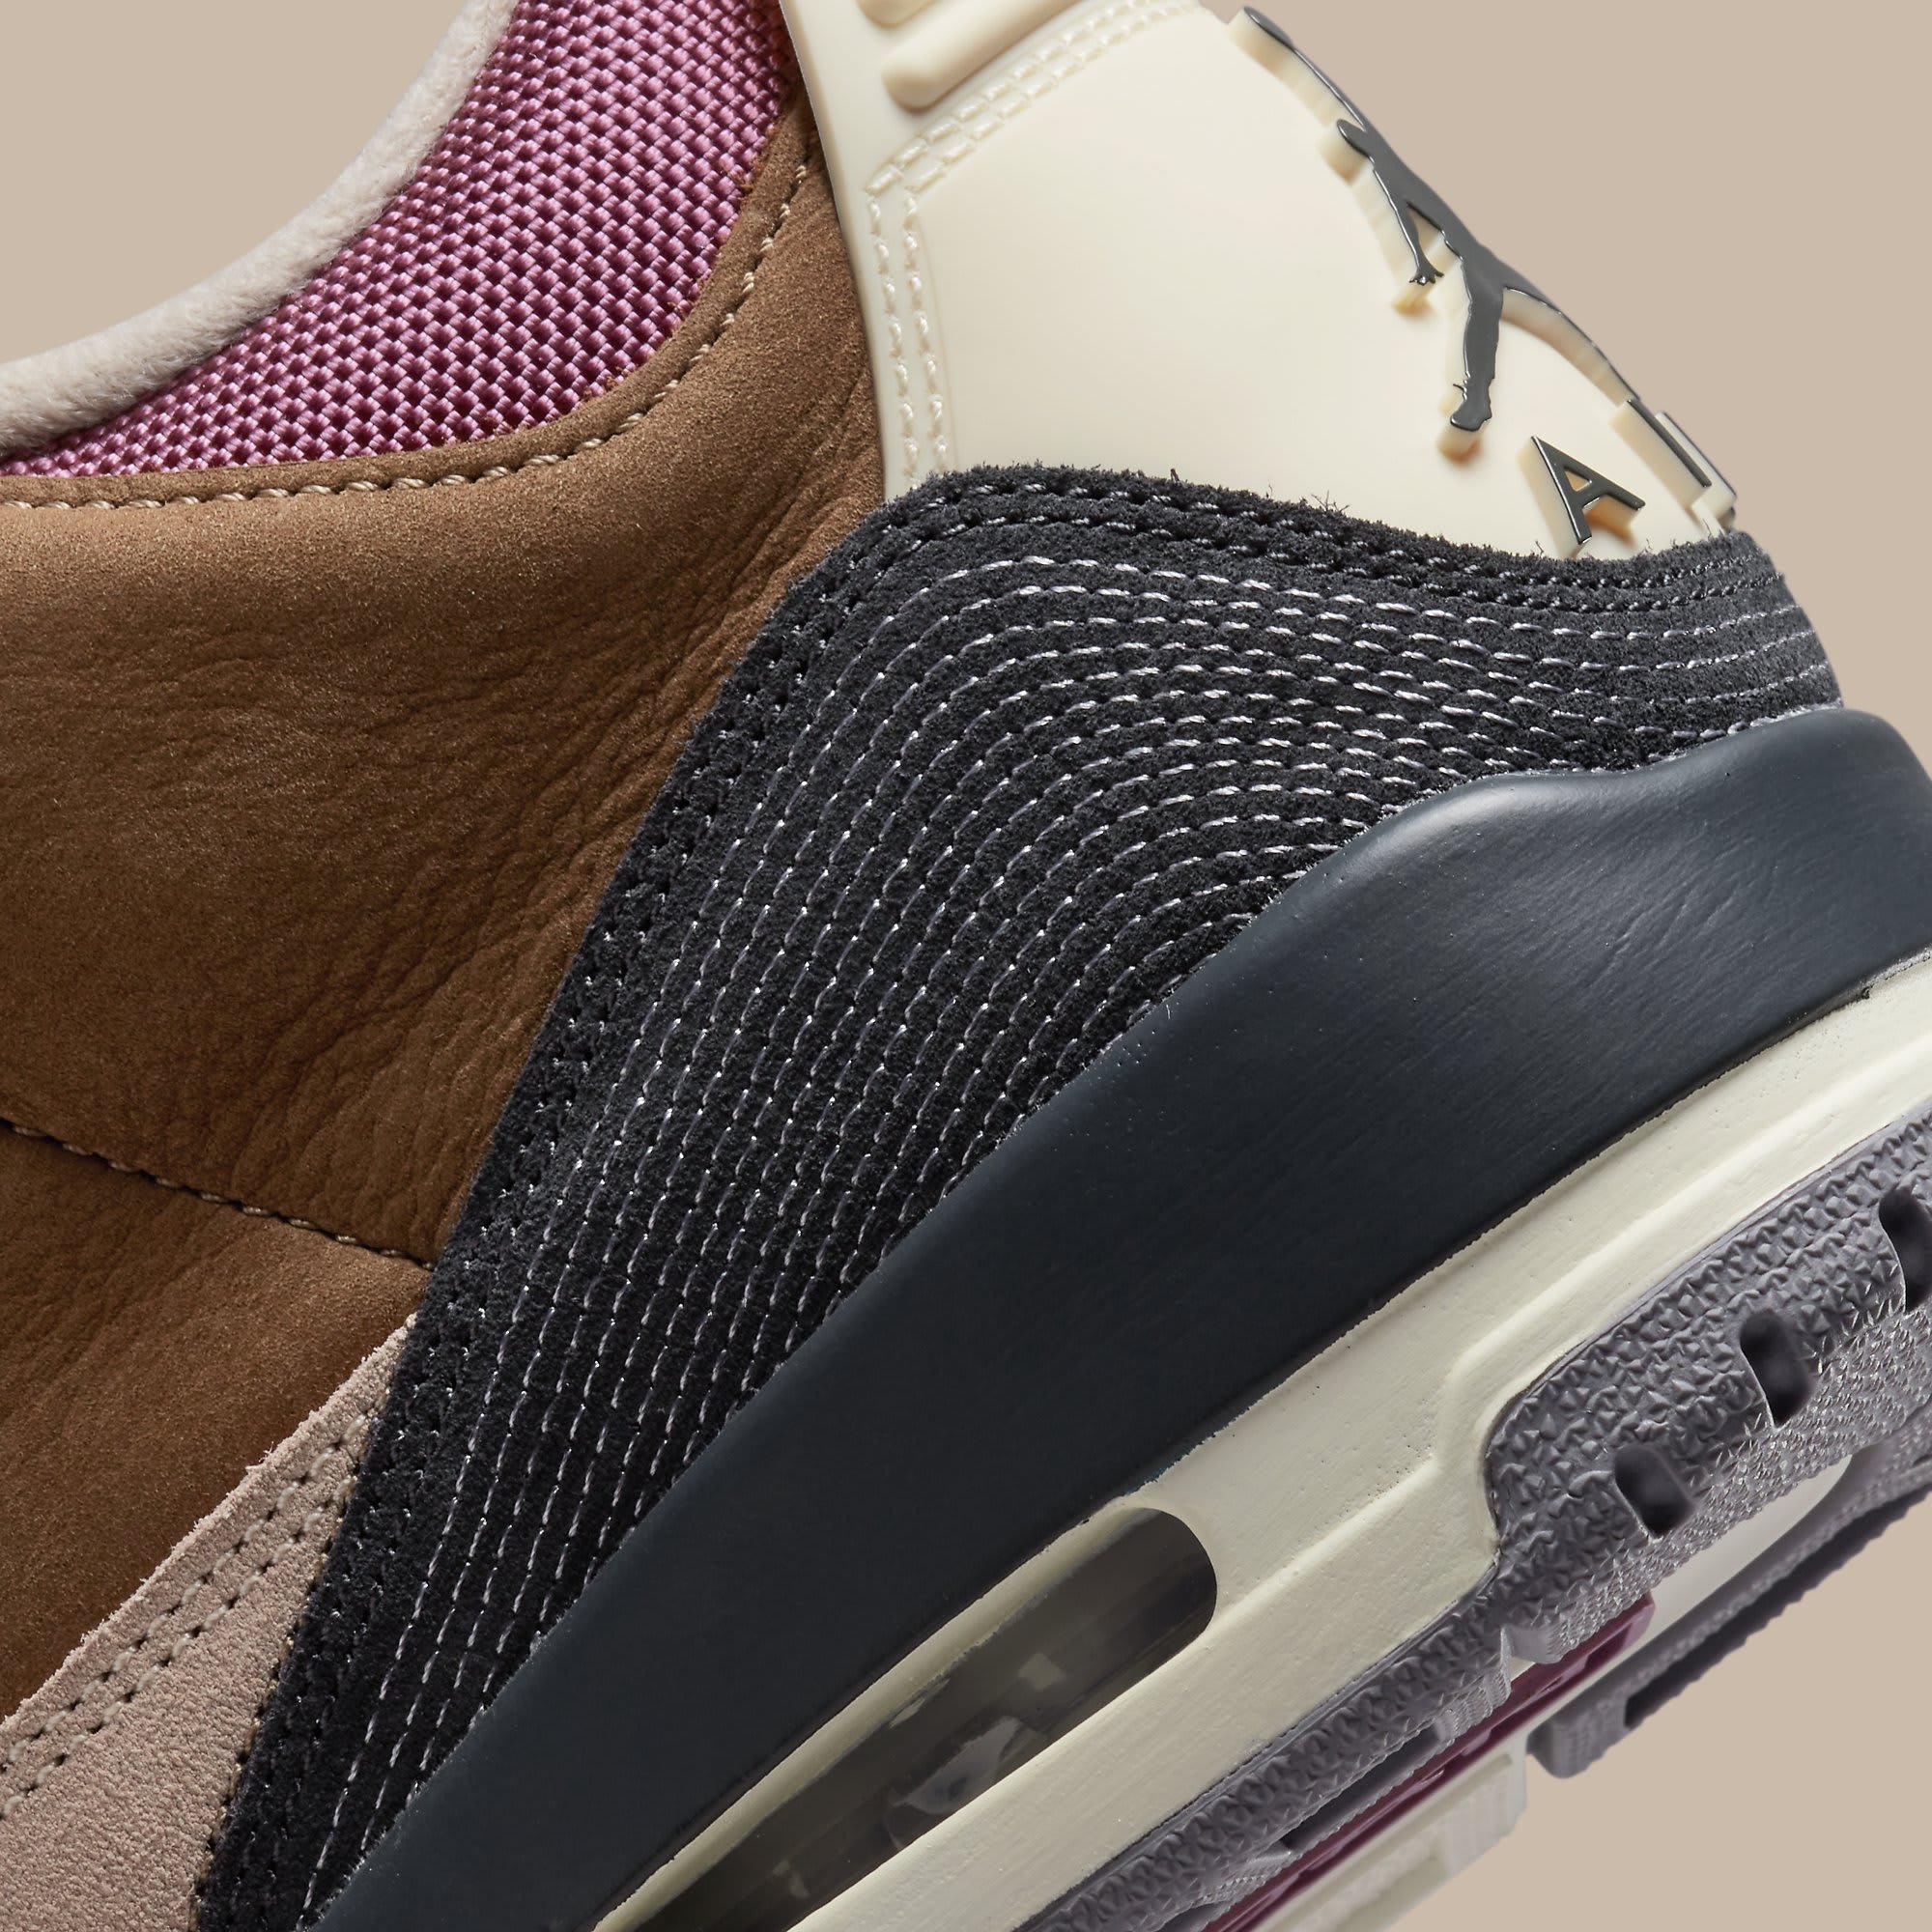 Air Jordan 3 Winterized 'Archaeo Brown' Release Date DR8869-200 | Sole ...